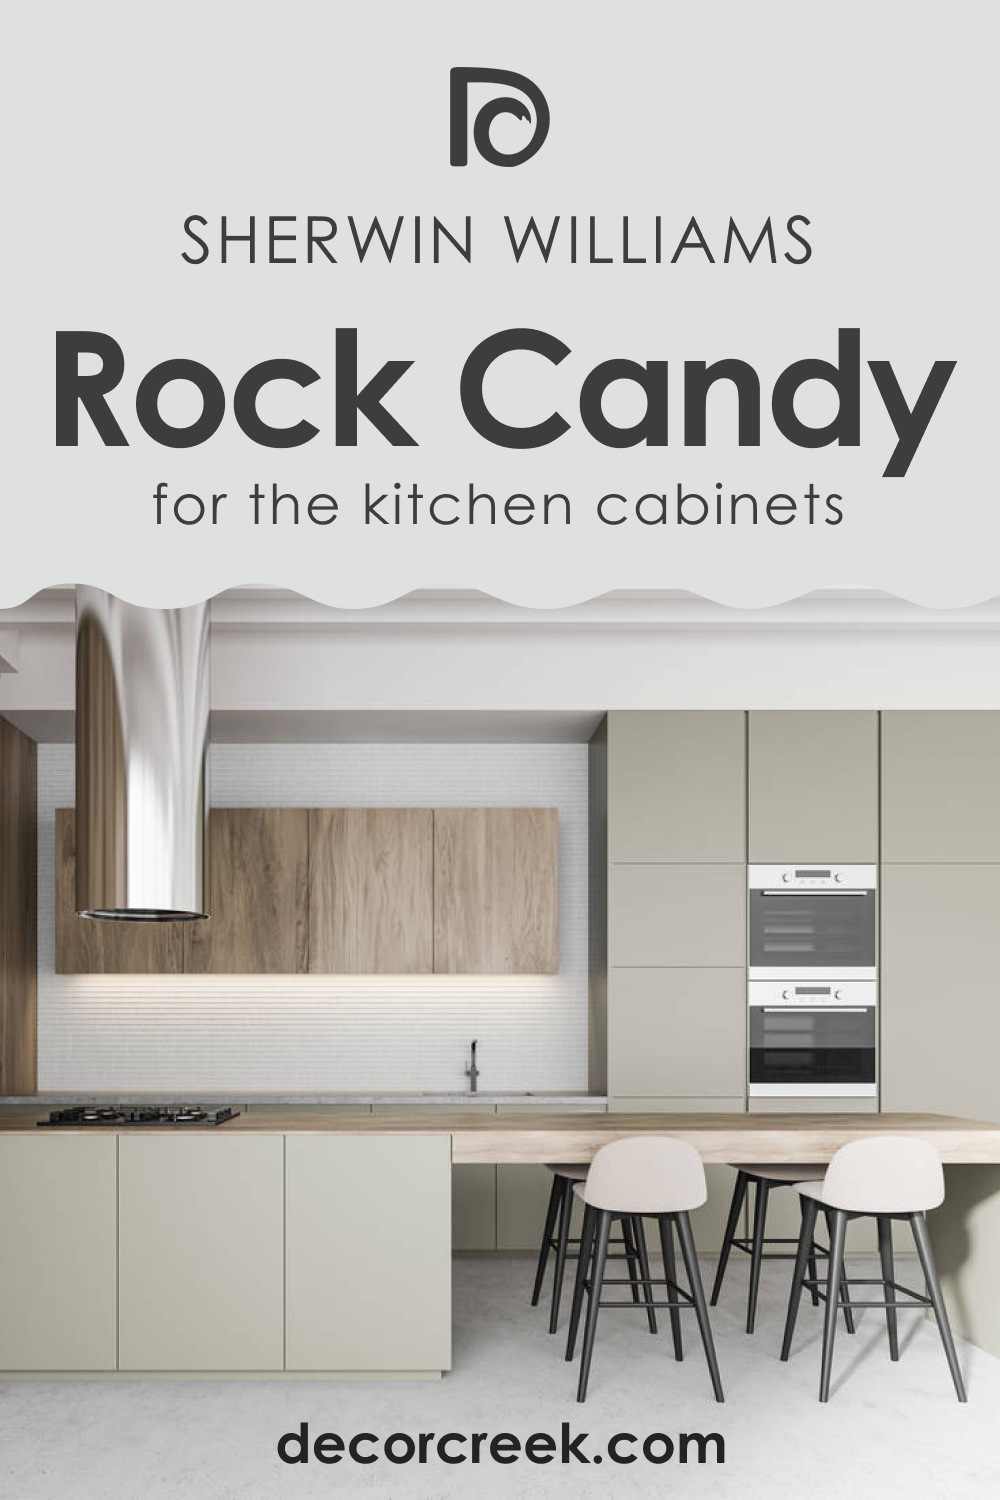 How to Use SW 6231 Rock Candy for the Kitchen Cabinets?